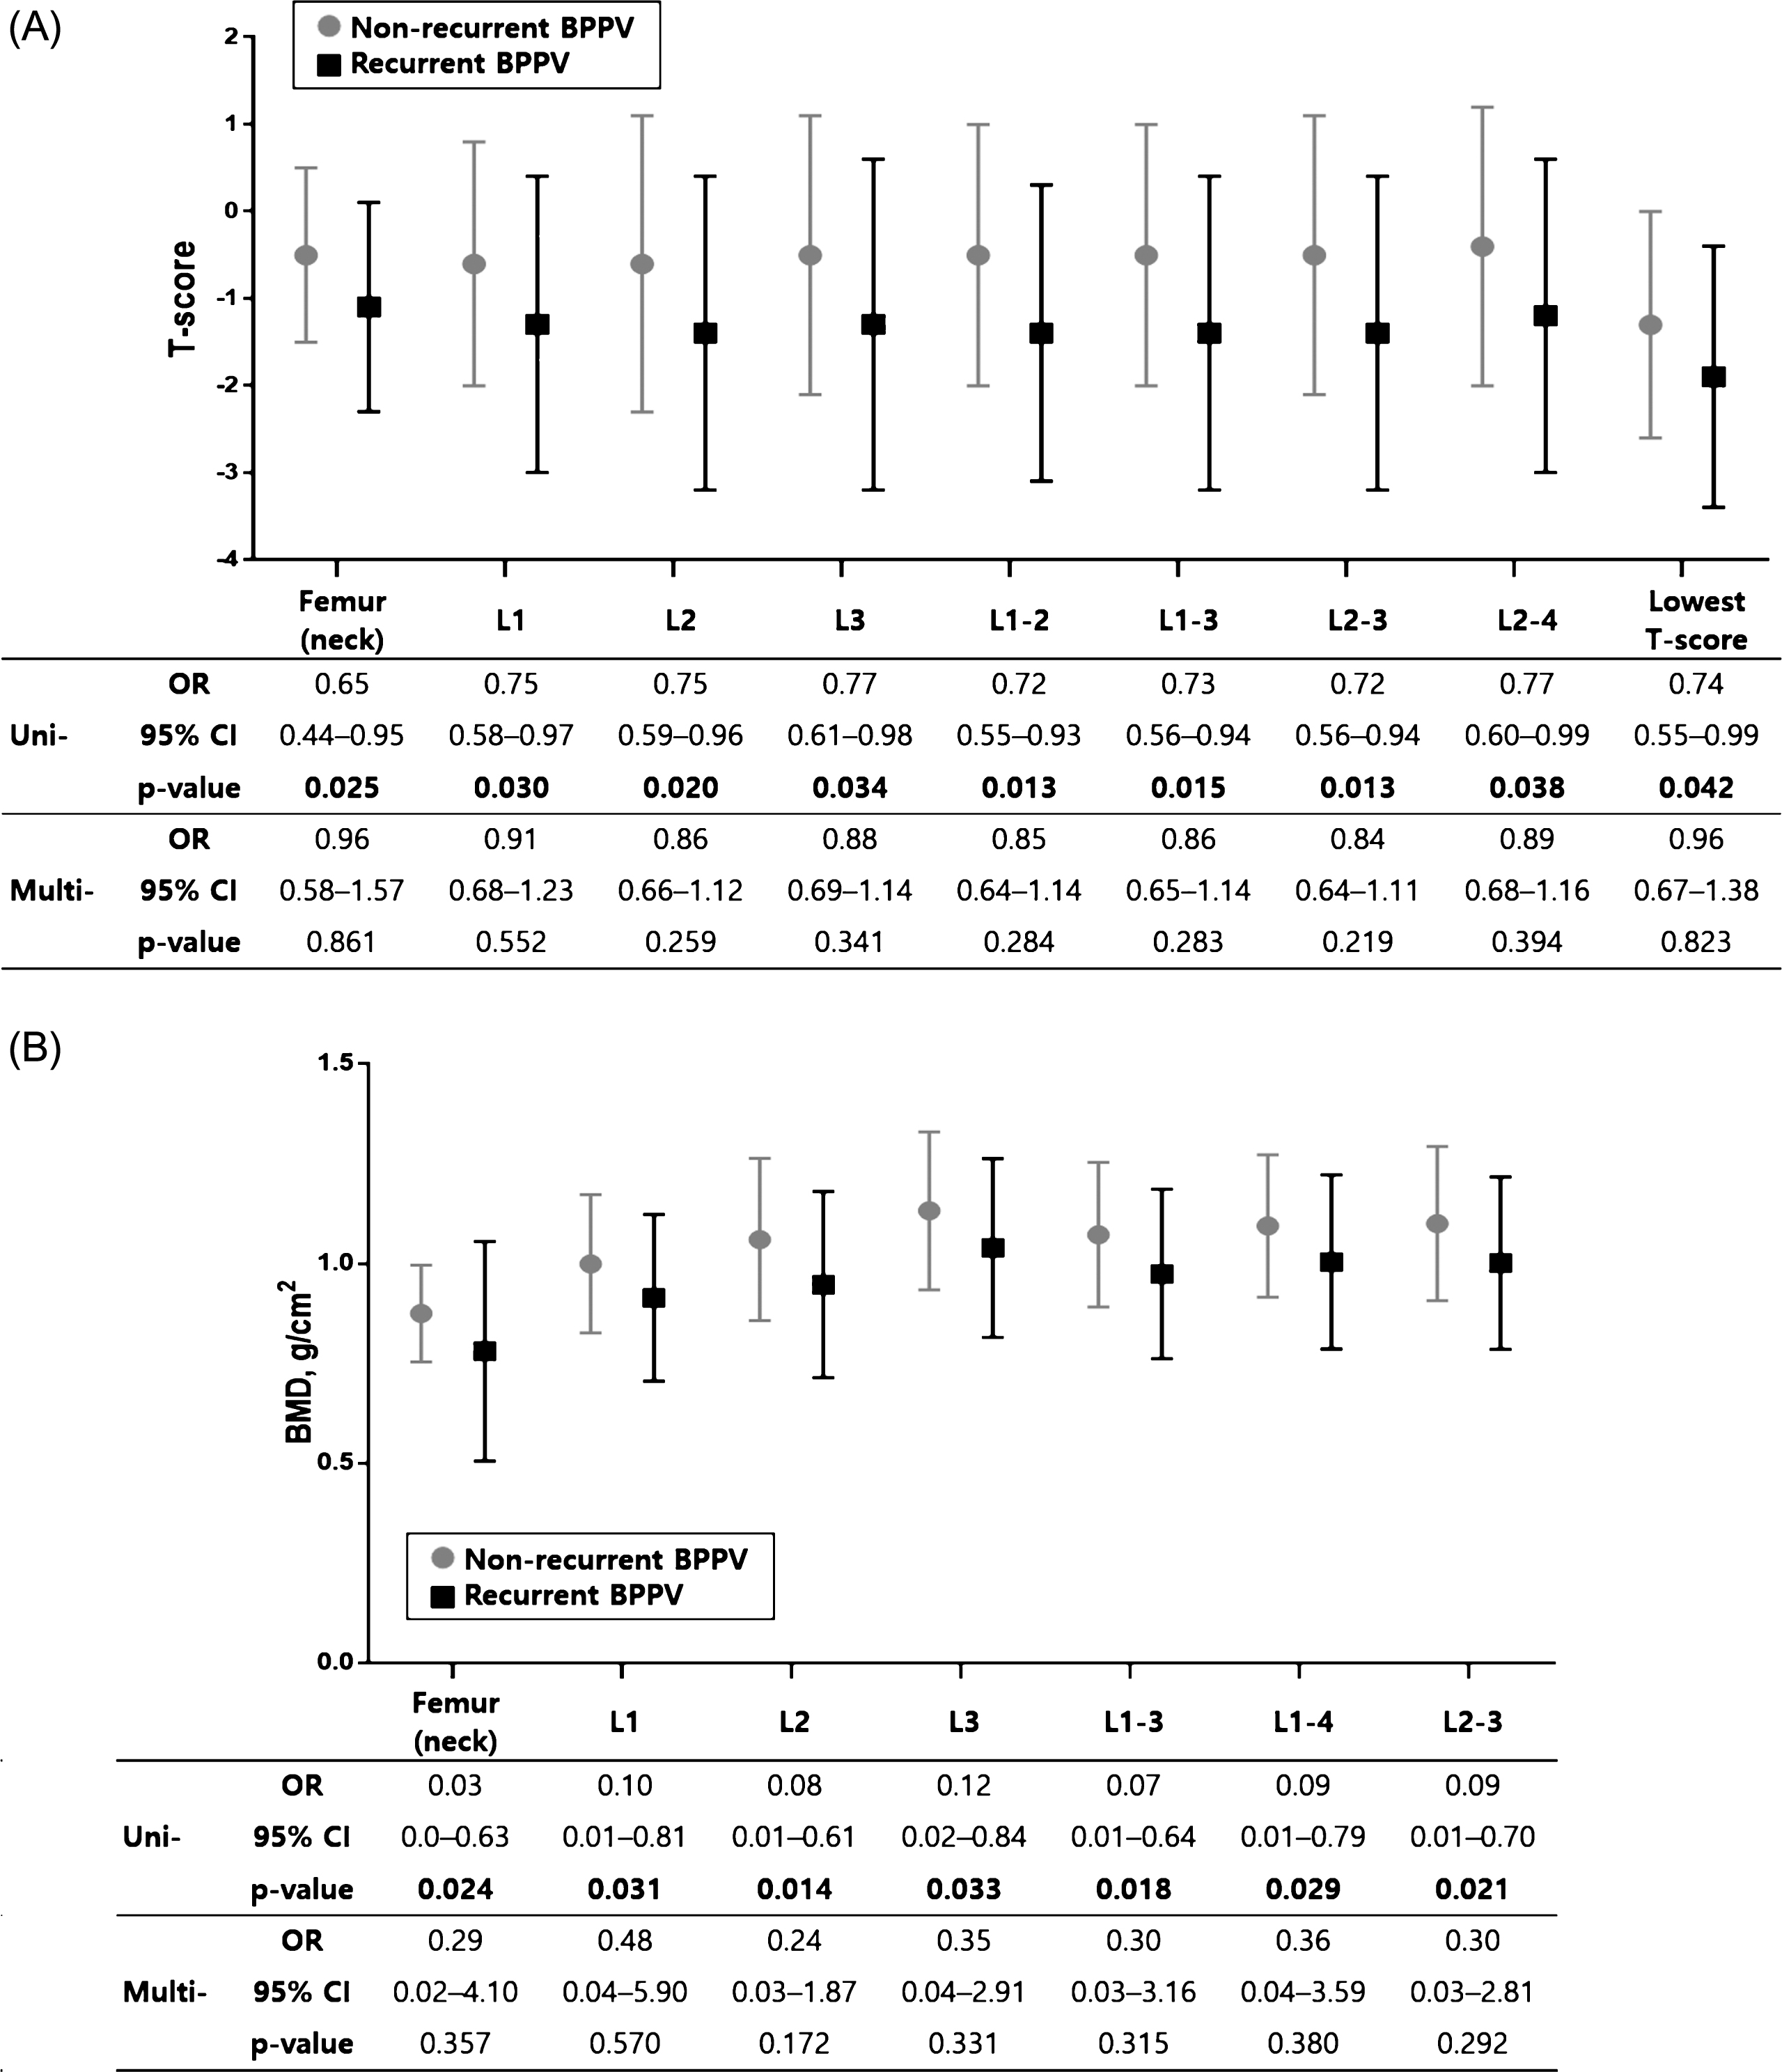 Comparison of T-score and BMD (g/cm2)in women with and without BPPV recurrence. In univariate logistic regression analyses, T-score (A) and BMD (g/cm2) (B) were significantly lower in women with recurrence compared to women without recurrence. However, these differences were not significant in multivariate logistic regression analyses adjusted for age. The error bar indicates one standard deviation from the mean. The mean±standard deviation values are presented in Table 4. Bold face indicates P < 0.05. Uni-, univariate logistic regression analyses; Multi-, multivariate logistic regression analyses; OR, odds ratio; CI, confidence interval.